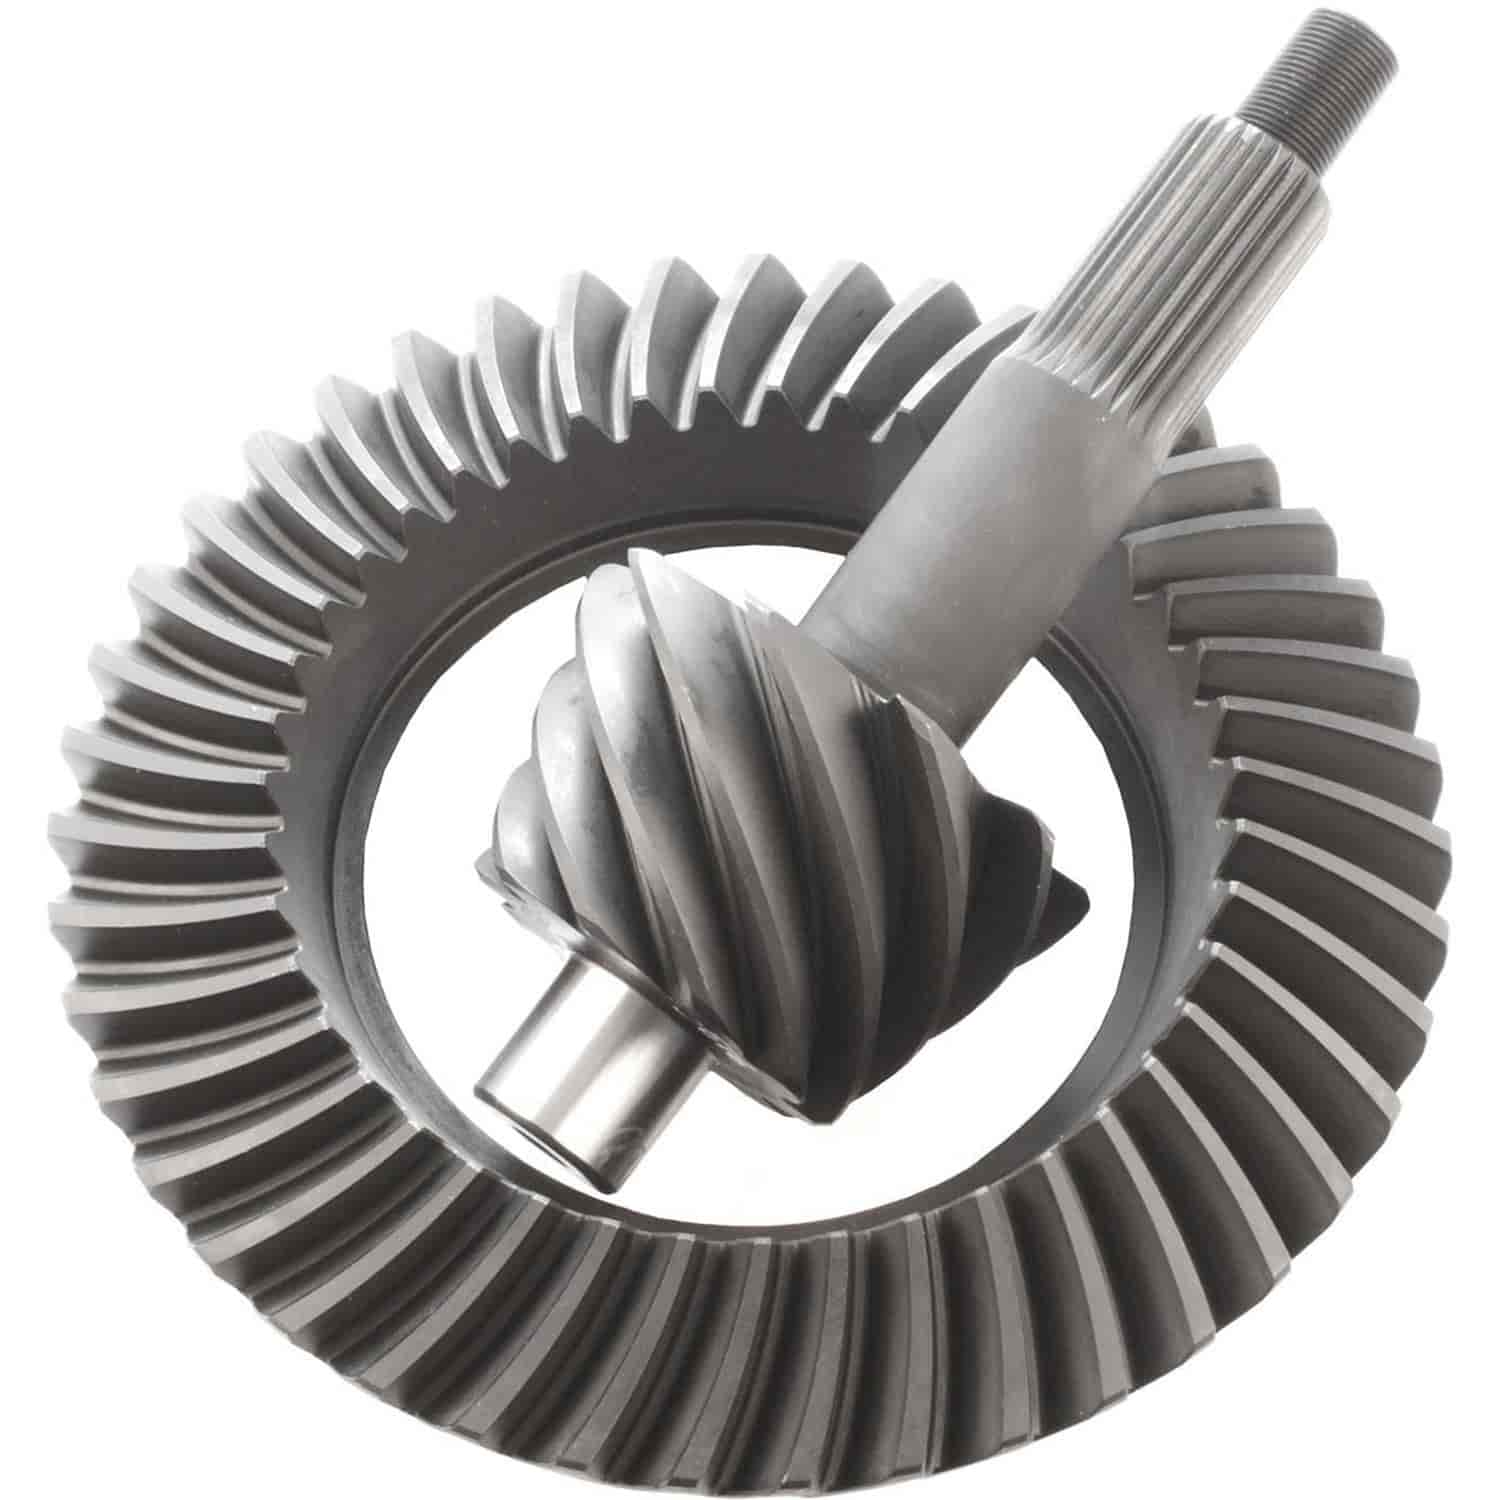 Excel Ring & Pinion Gear Set Ford 9" Ratio: 4.33